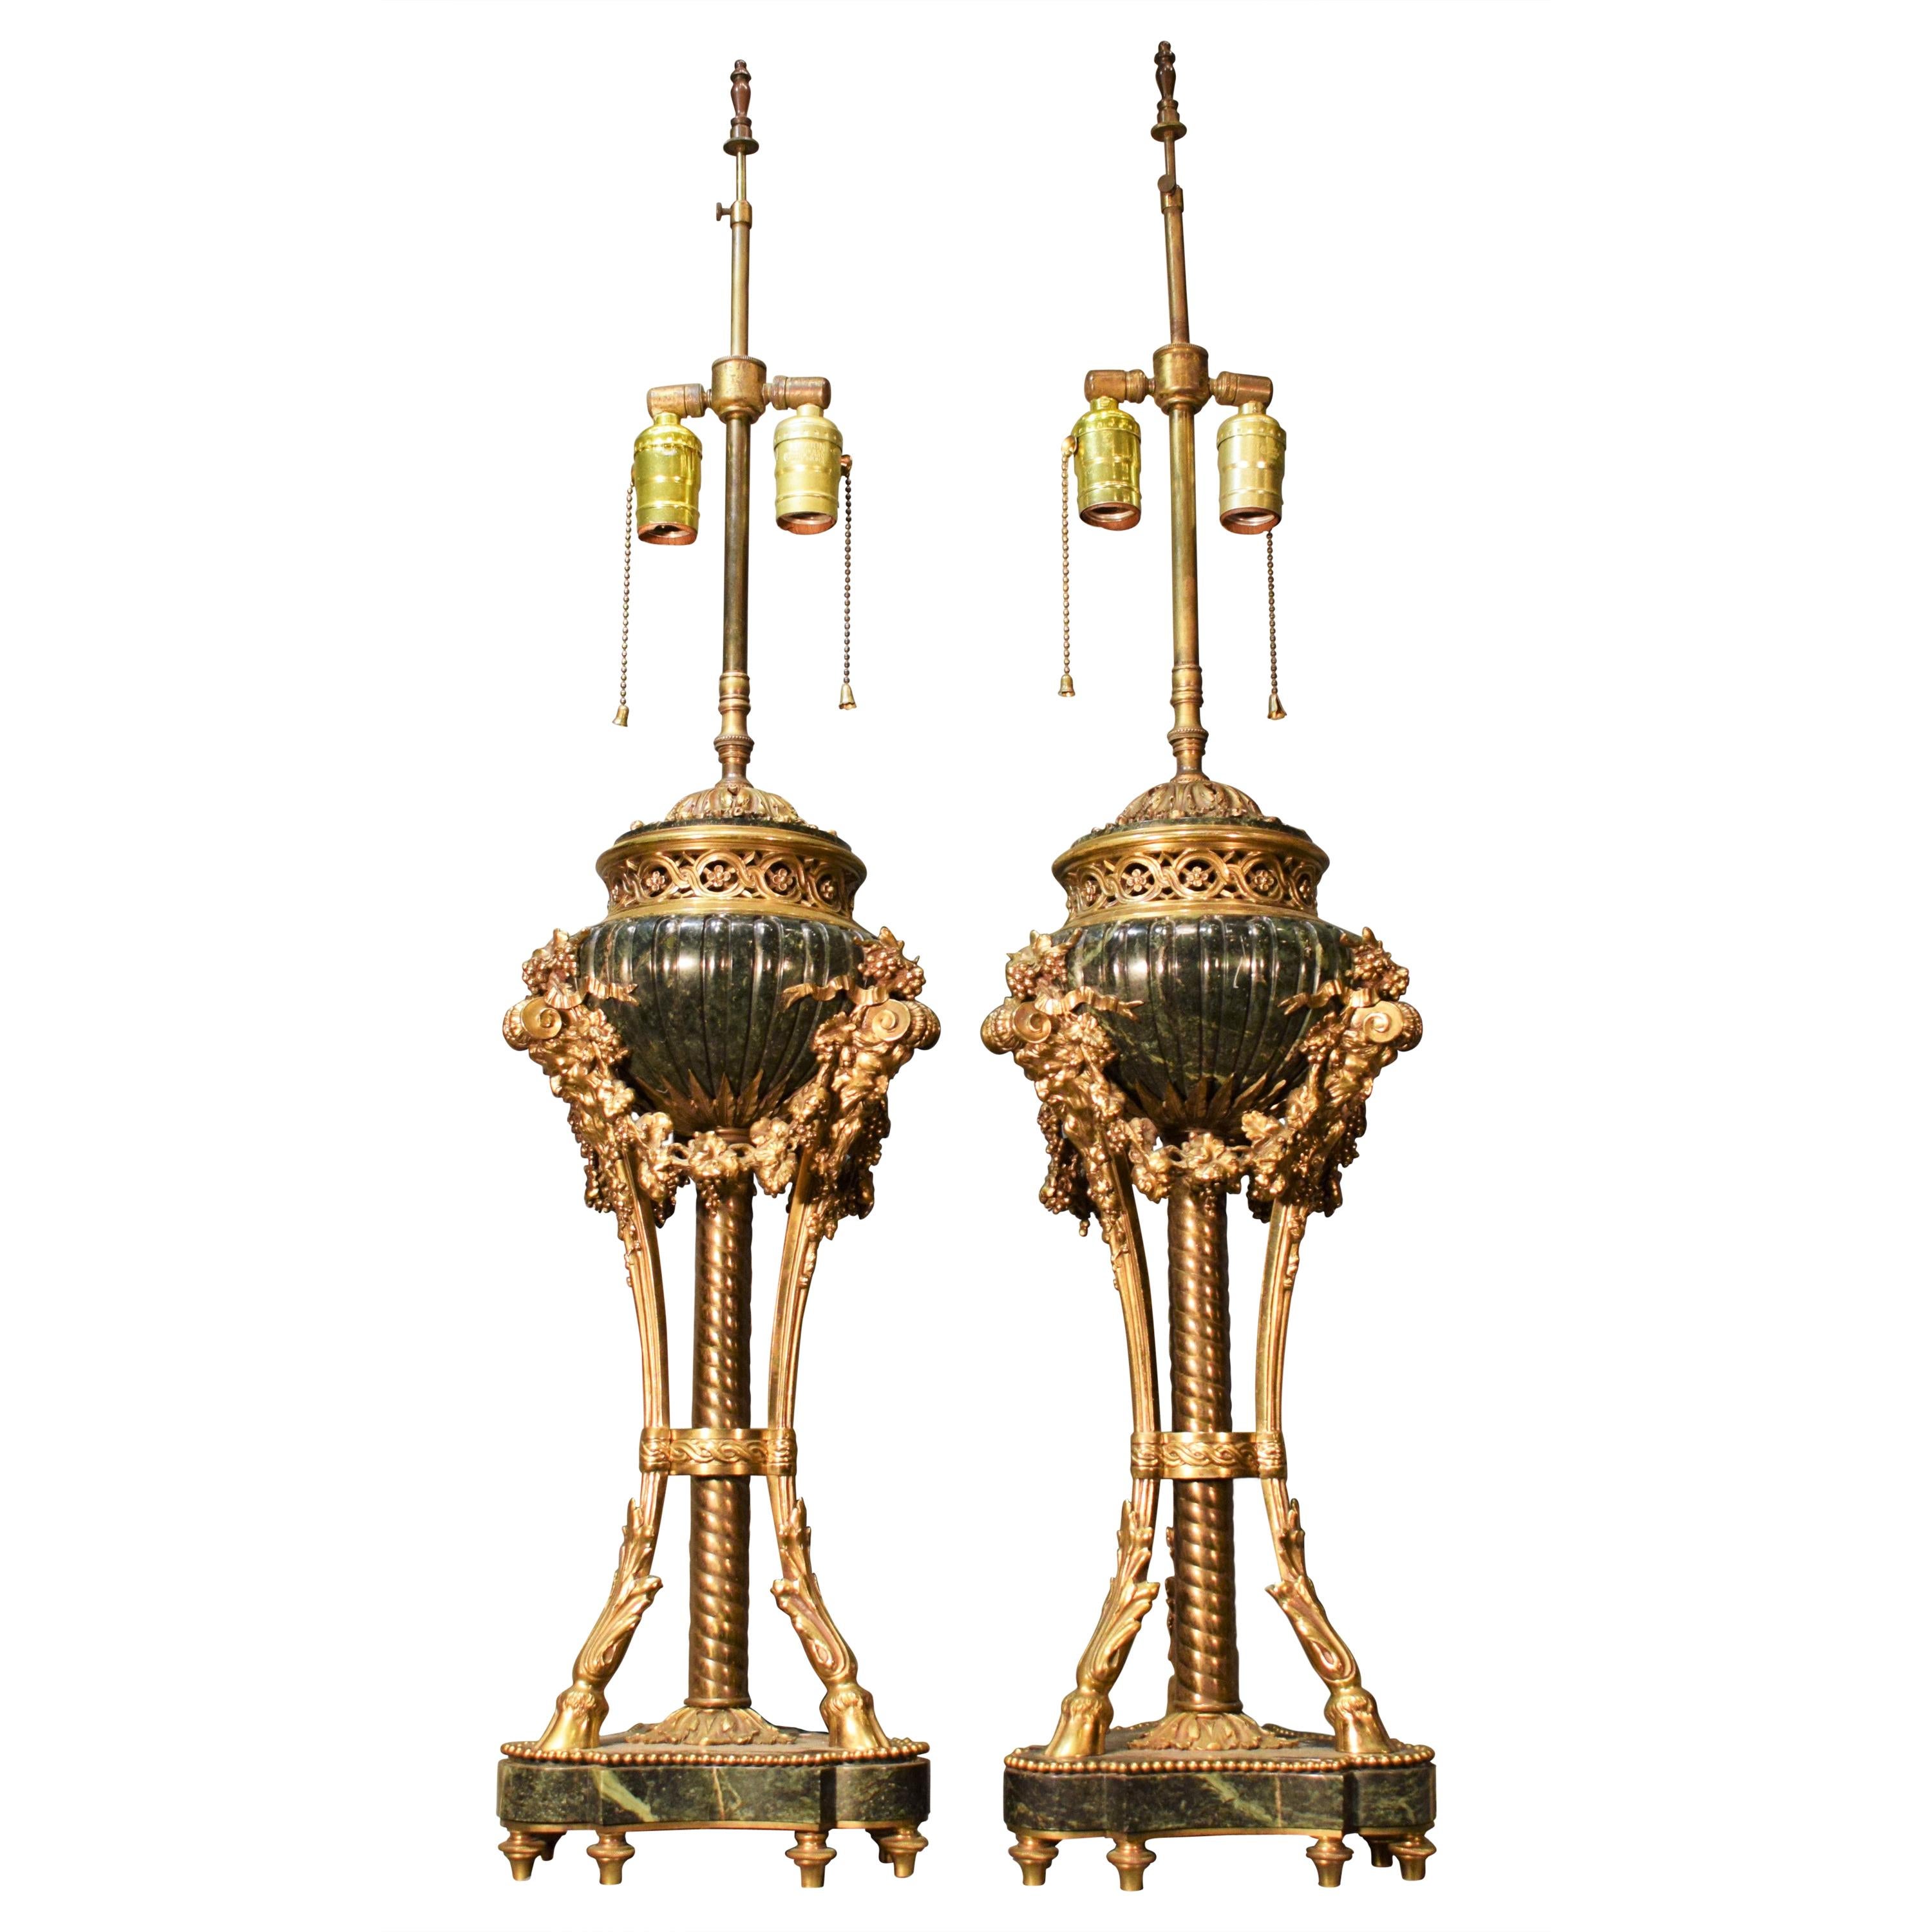 Exquisite Pair of Gilt Bronze and Marble Lamps For Sale